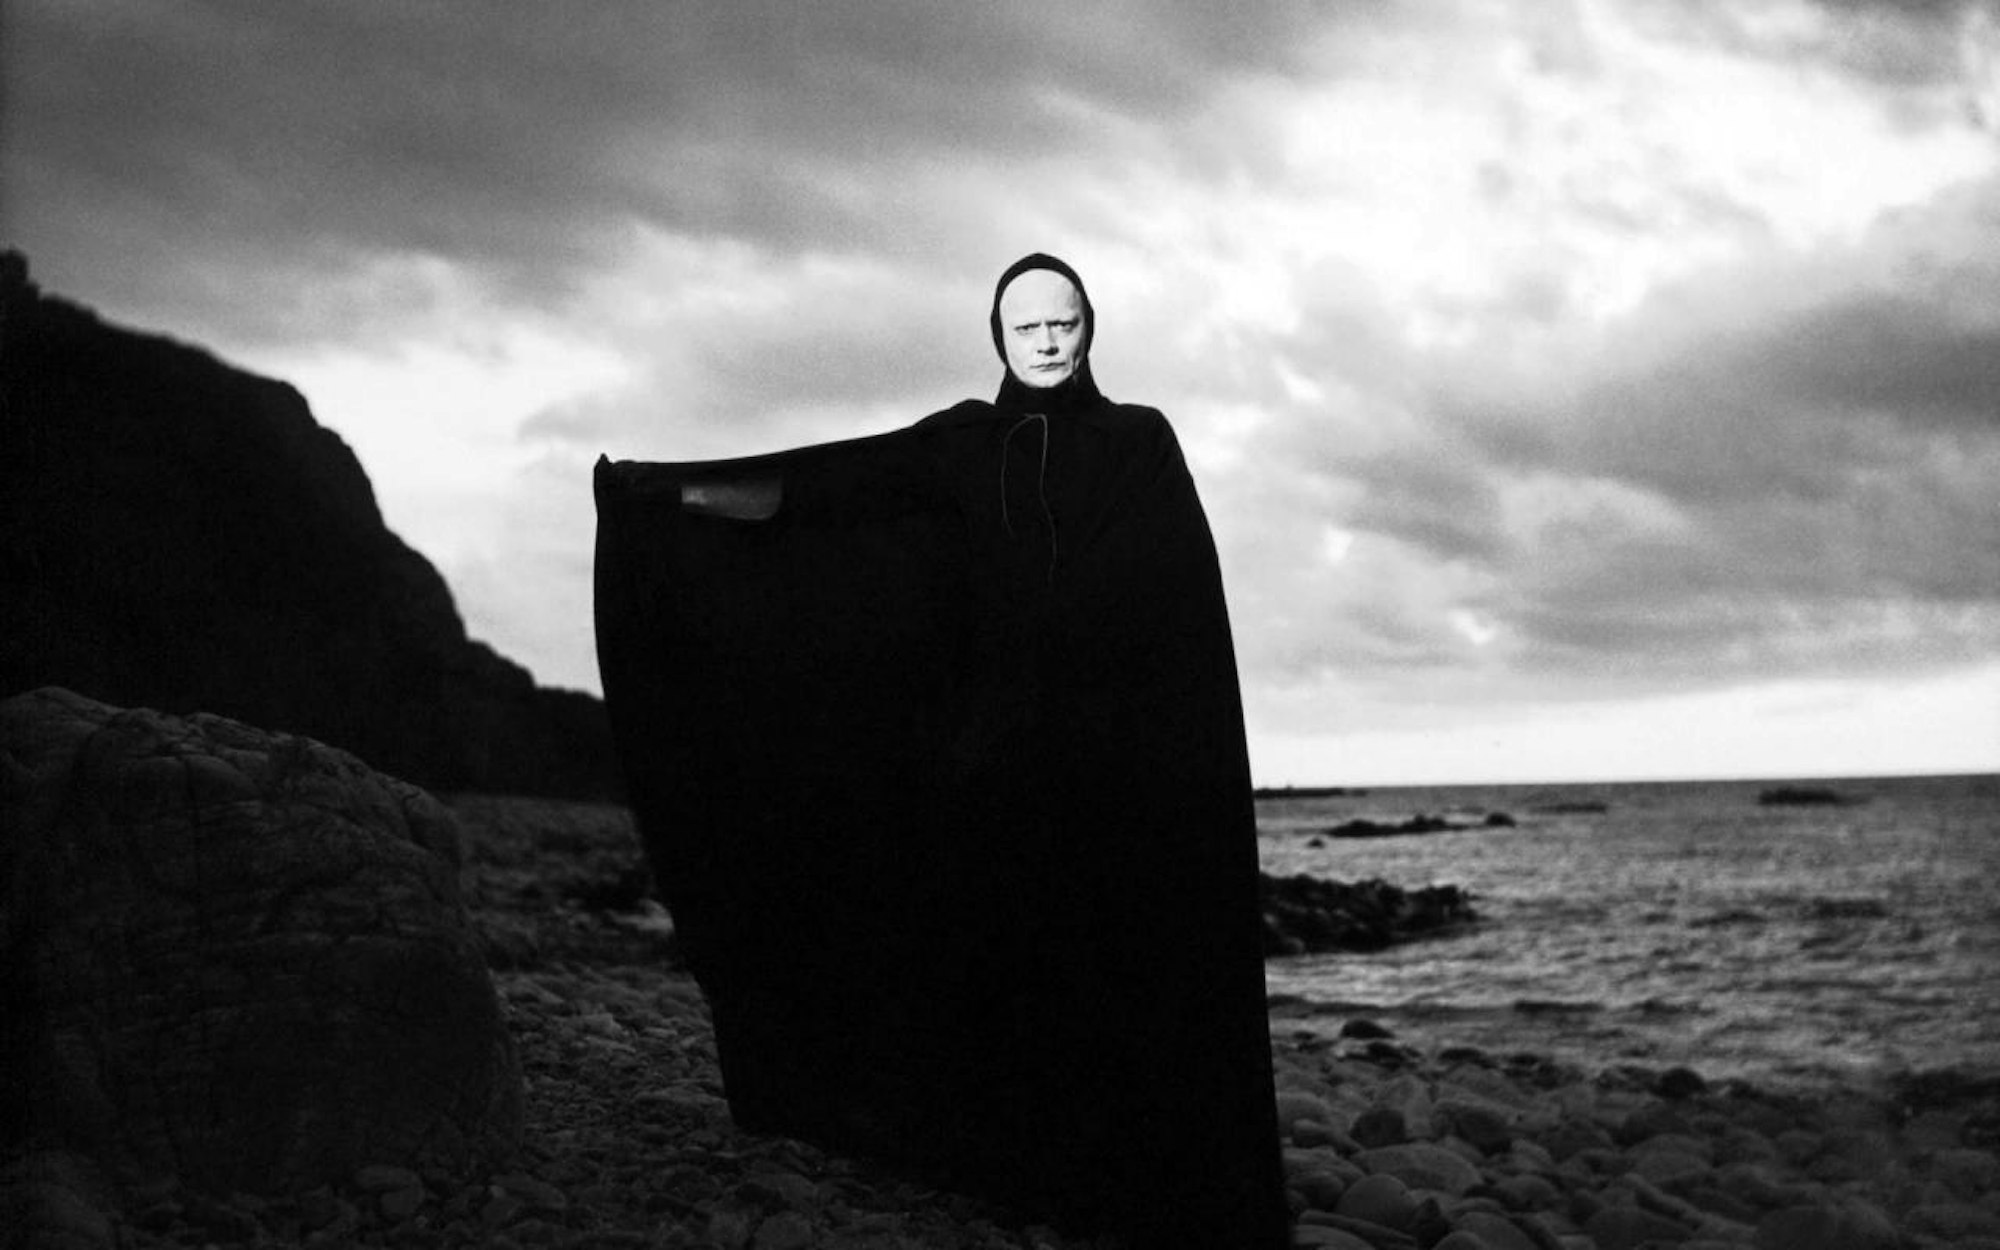 A figure with a white face wearing a floor-length black robe extends an arm. Behind them are cliffs, the sea and clouds.